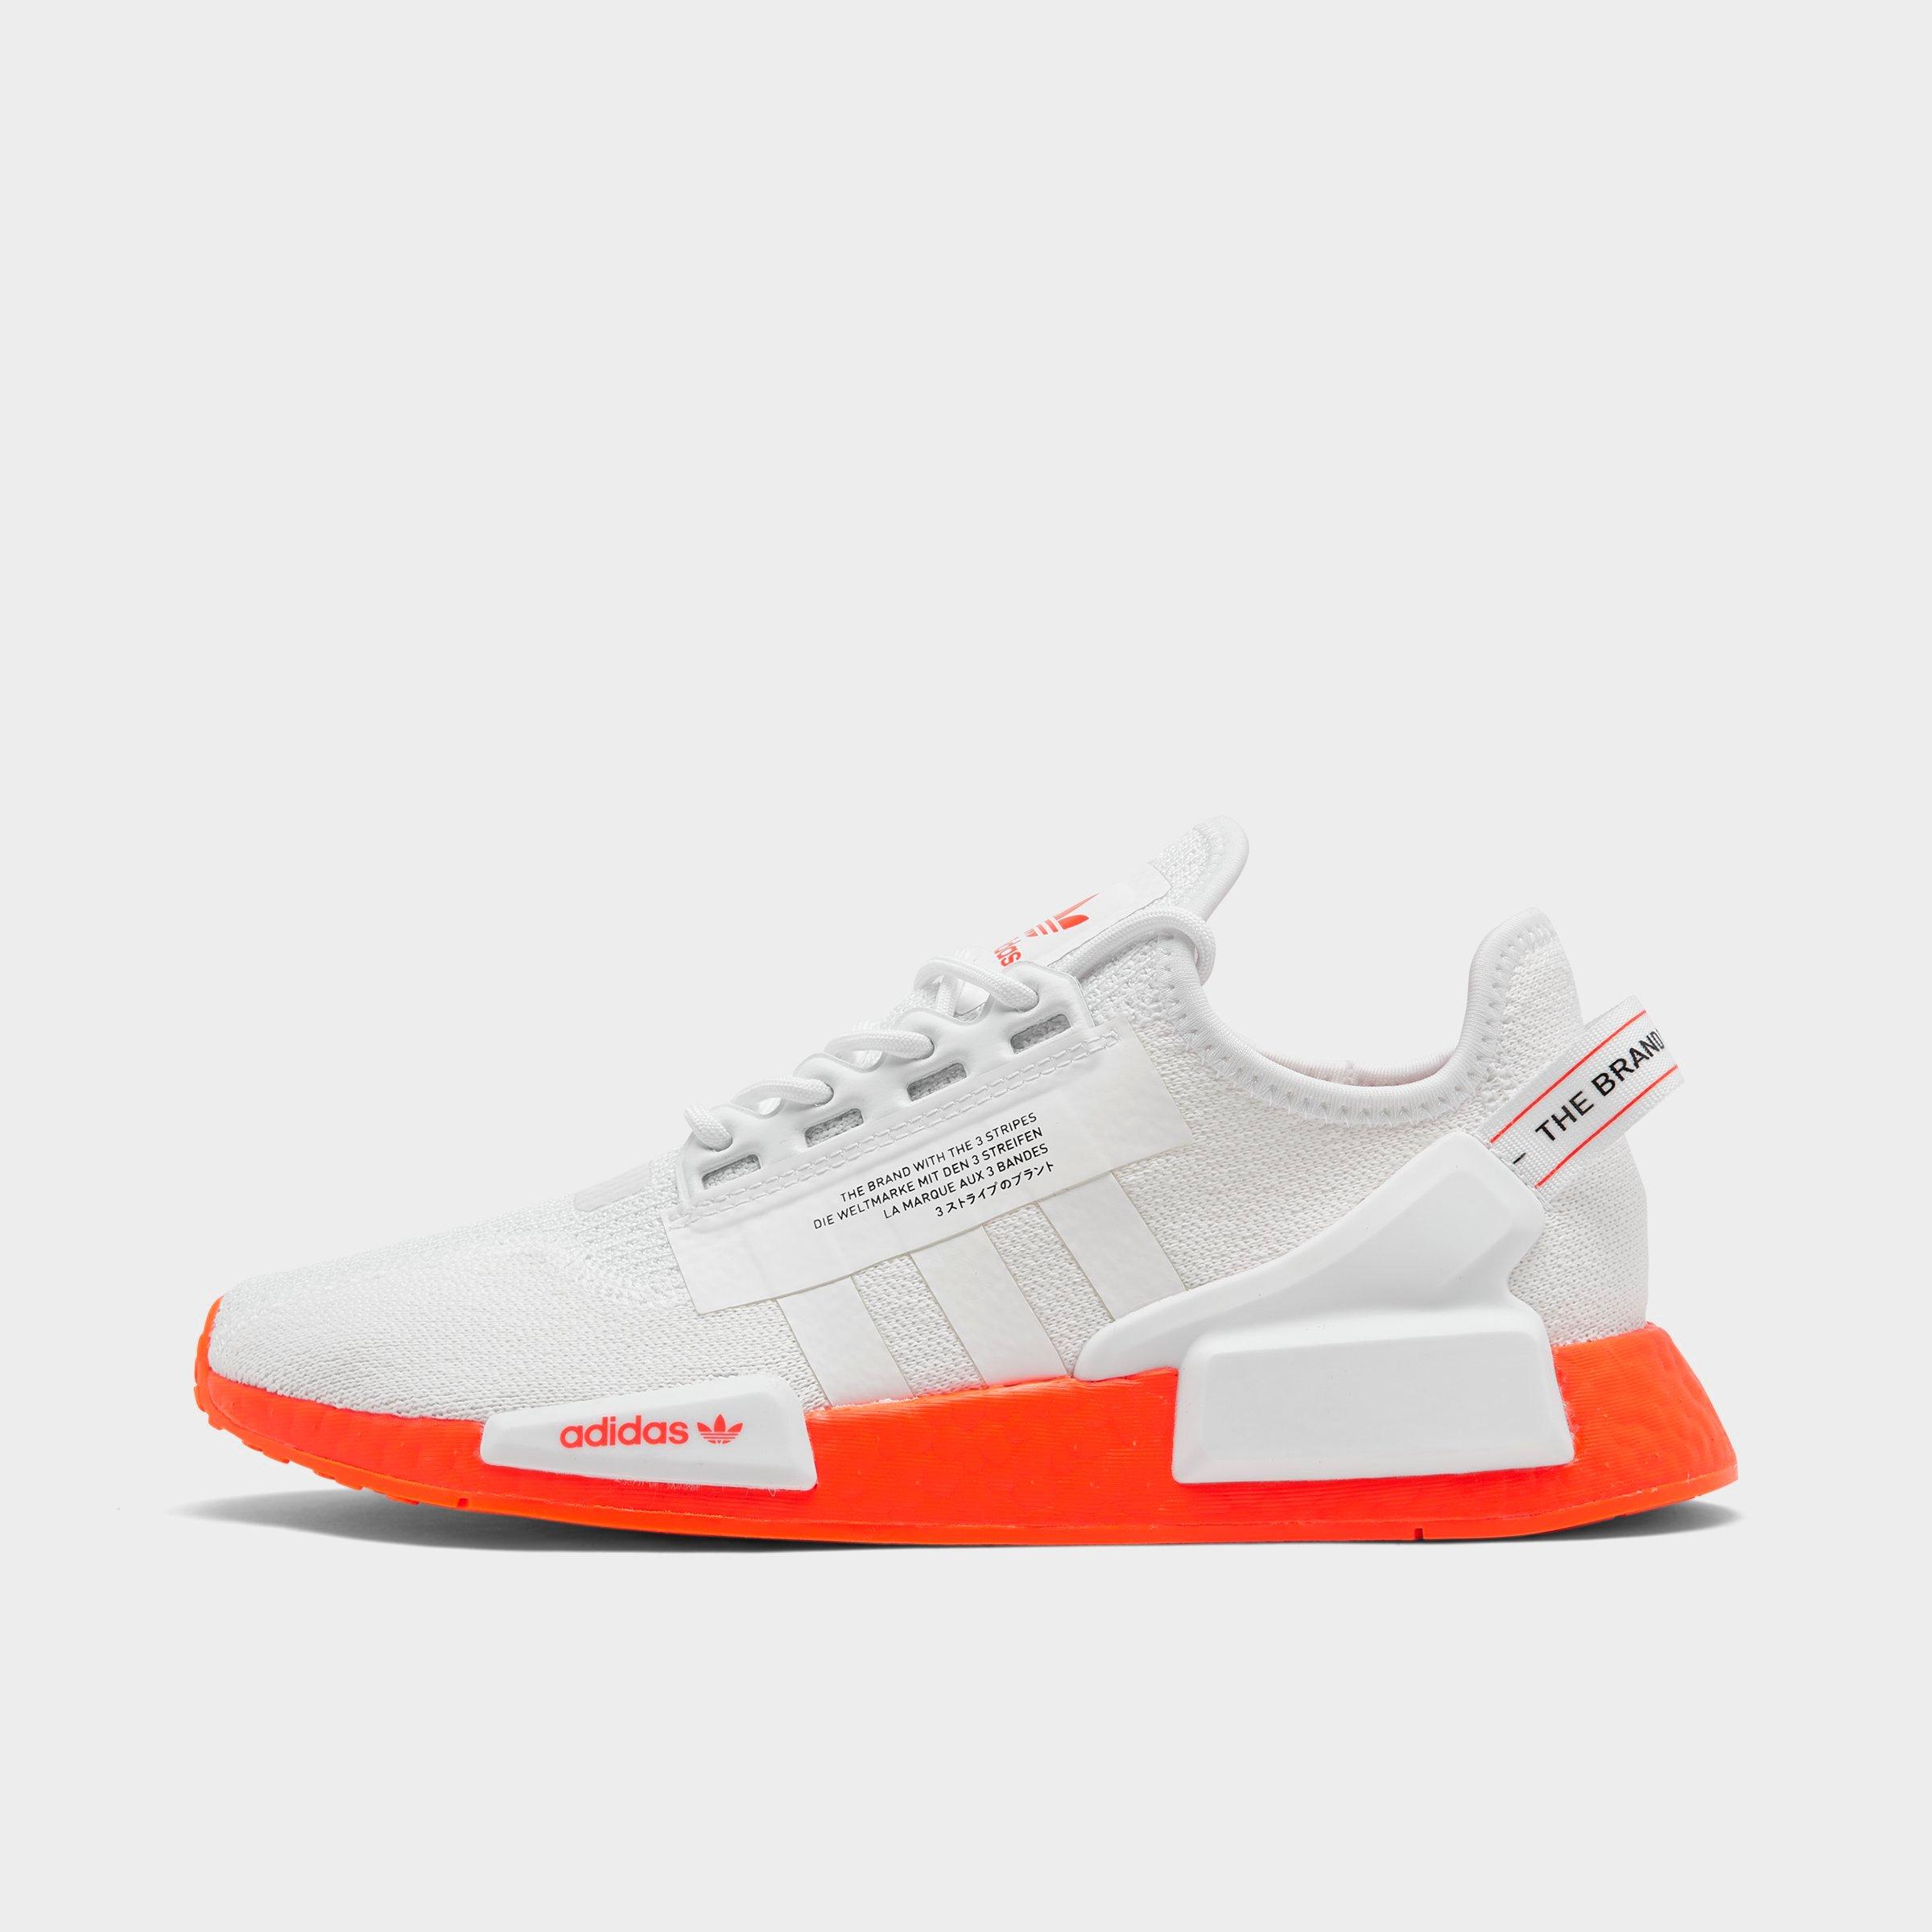 Adidas NMD R1 Talc Off White Woman 4 5 6 7 All Sizes S76007